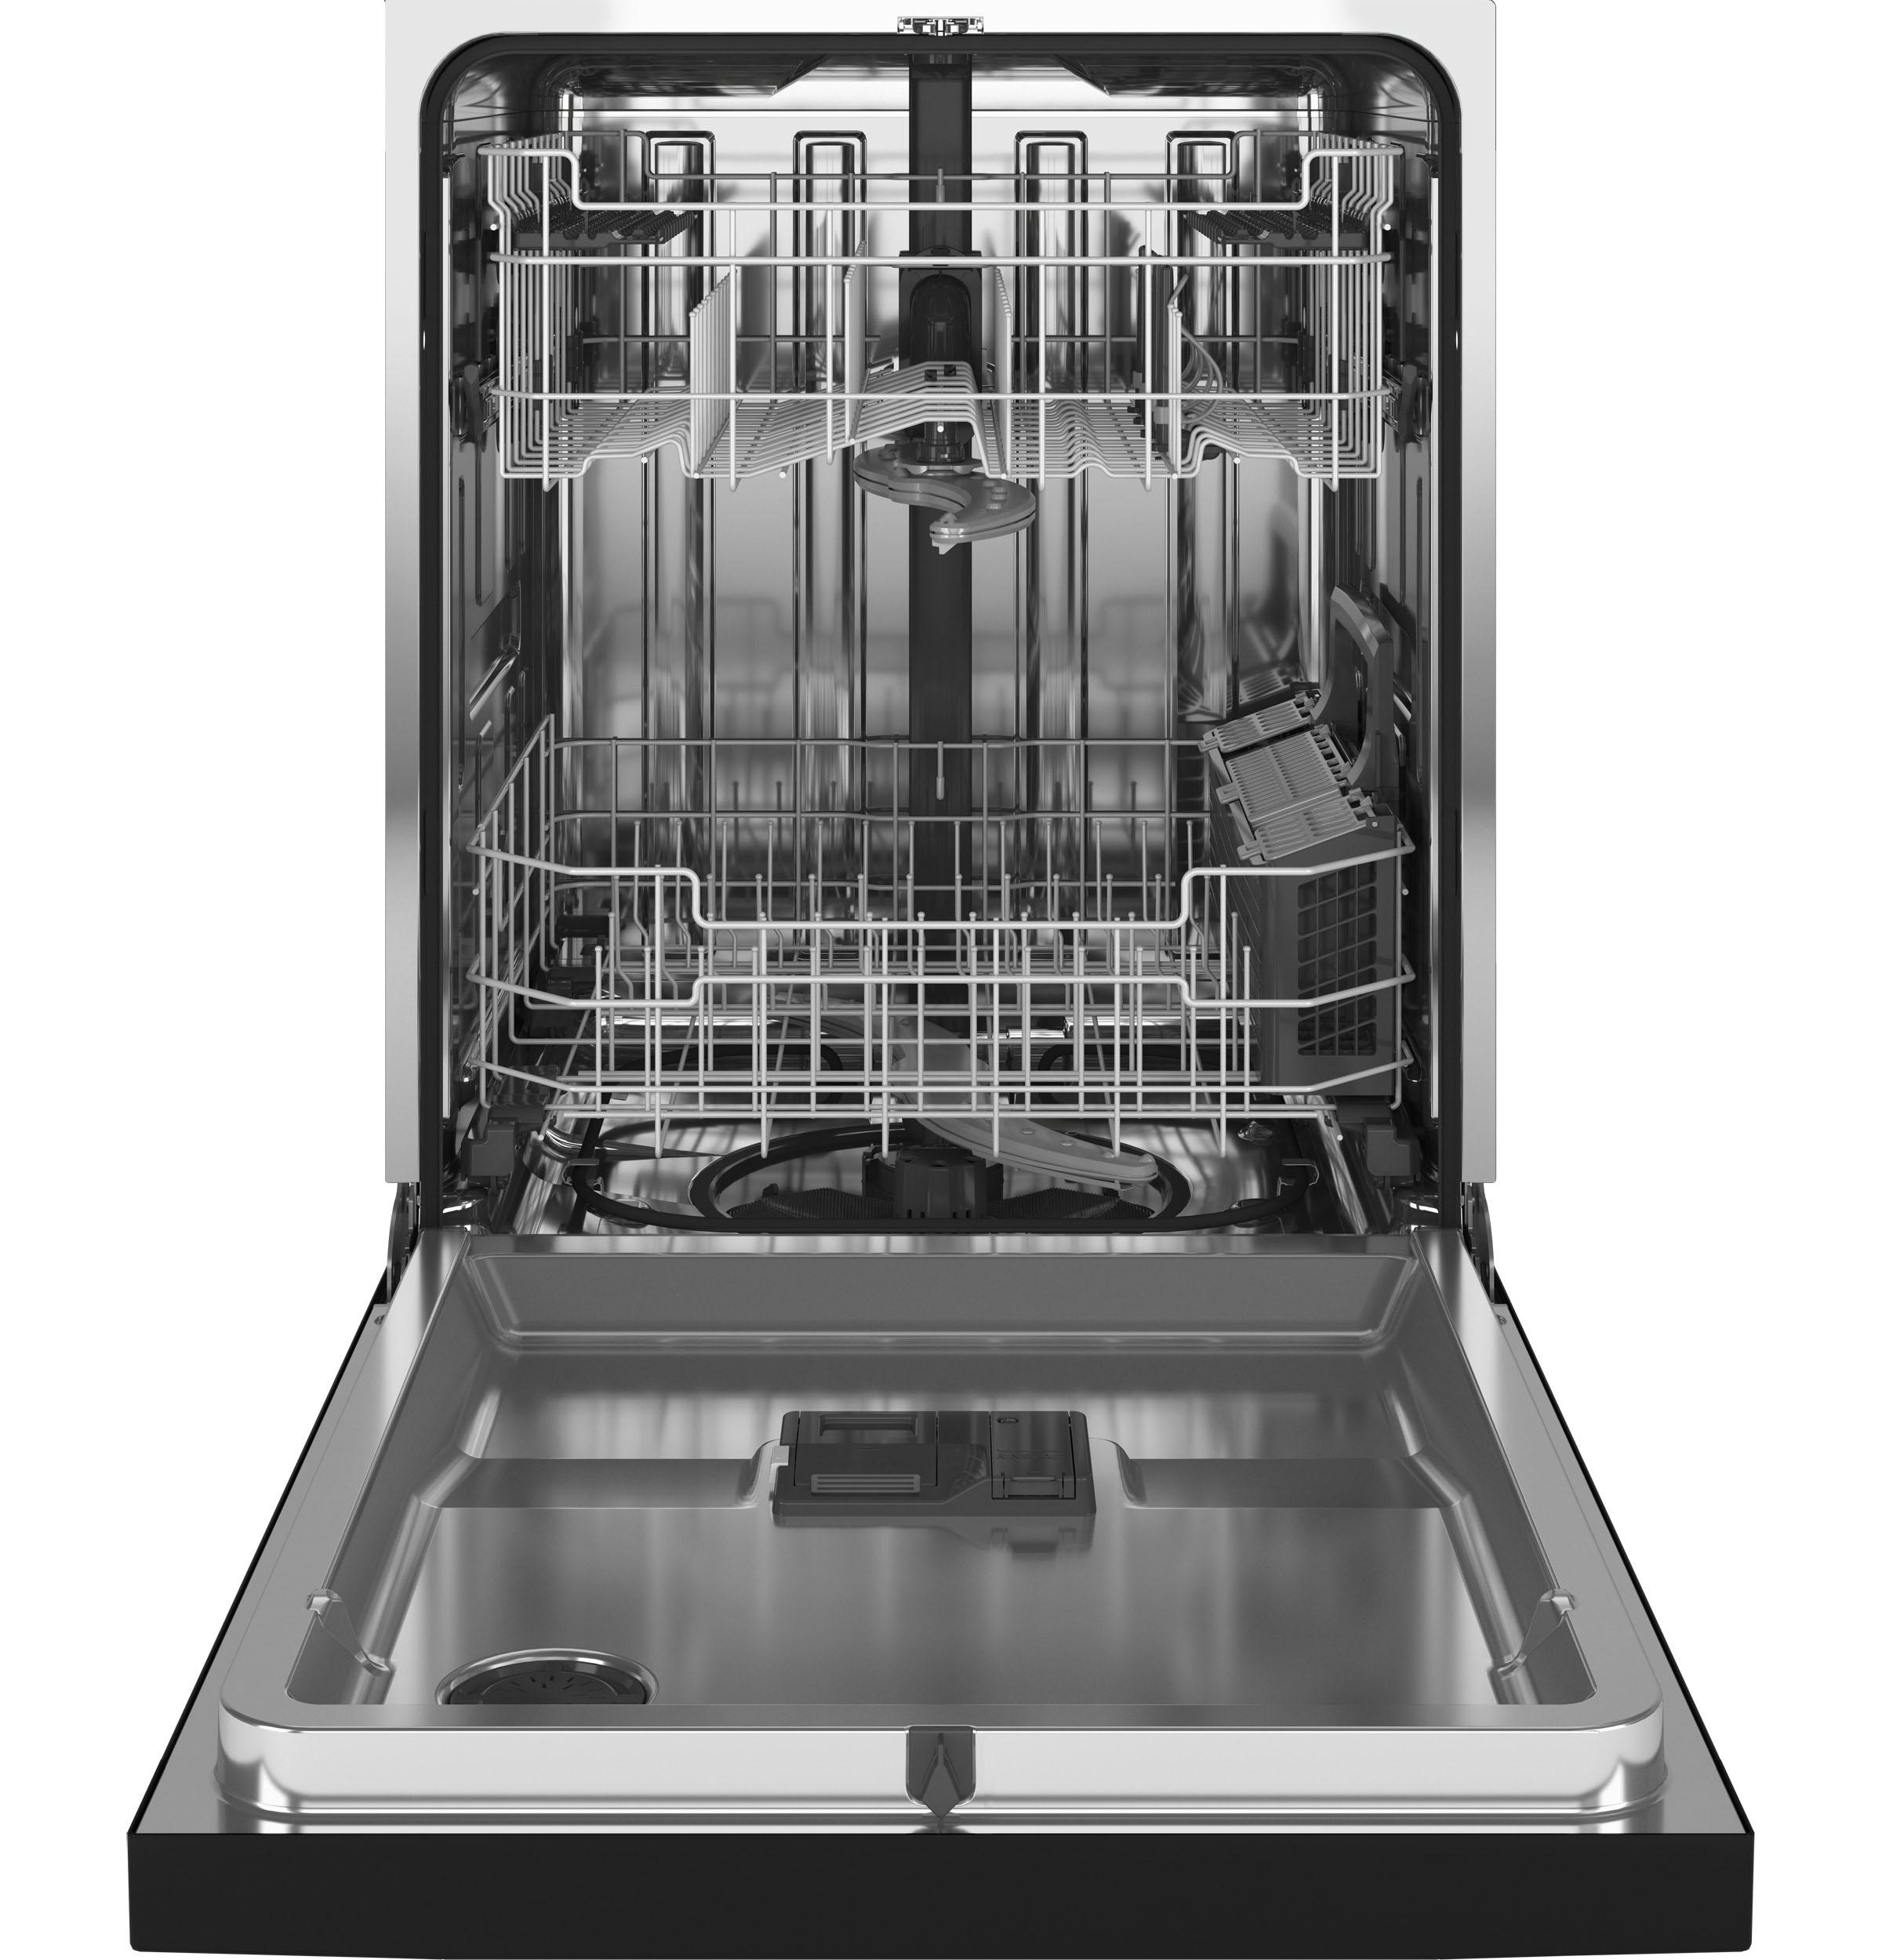 GE® Top Control with Stainless Steel Interior Dishwasher with Sanitize Cycle & Dry Boost with Fan Assist